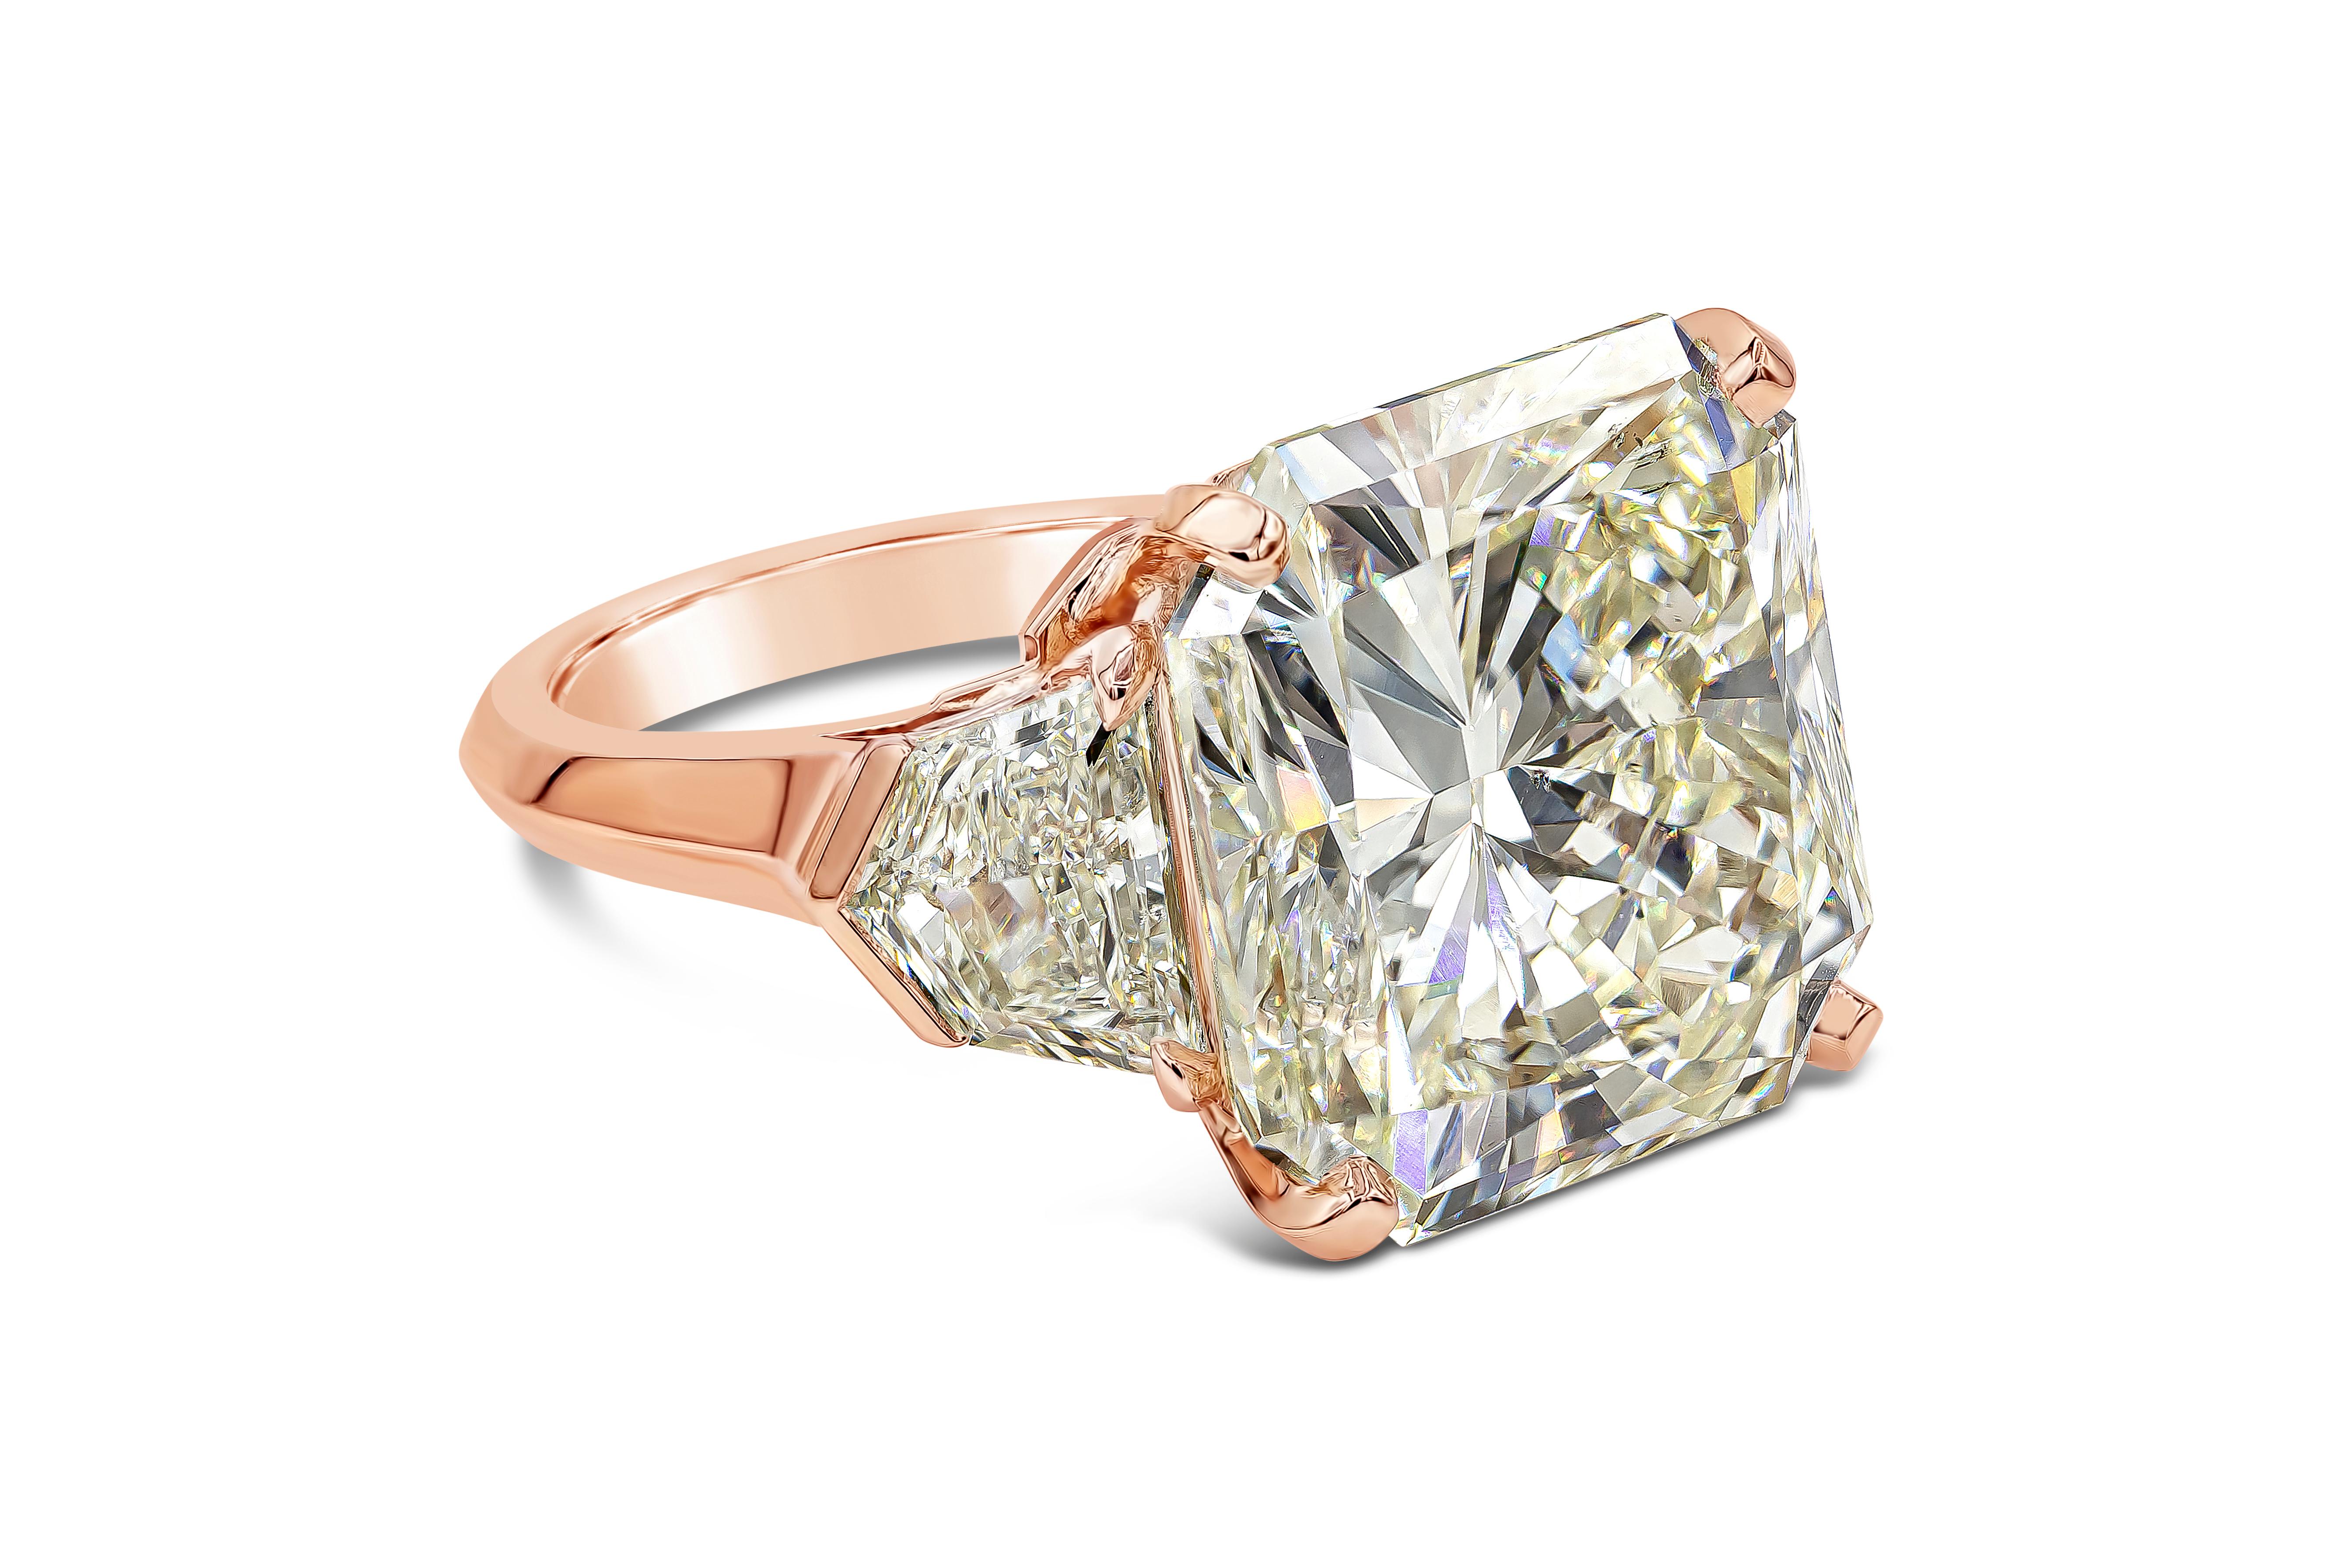 An immense center stone three stone engagement ring features a GIA Certified 20.05 carat, radiant cut diamond, O-P Color and SI1 in Clarity. Flanked by shield diamond on each side weighing 2.26 carats, O-P Color and VS in Clarity. Beautifully set in